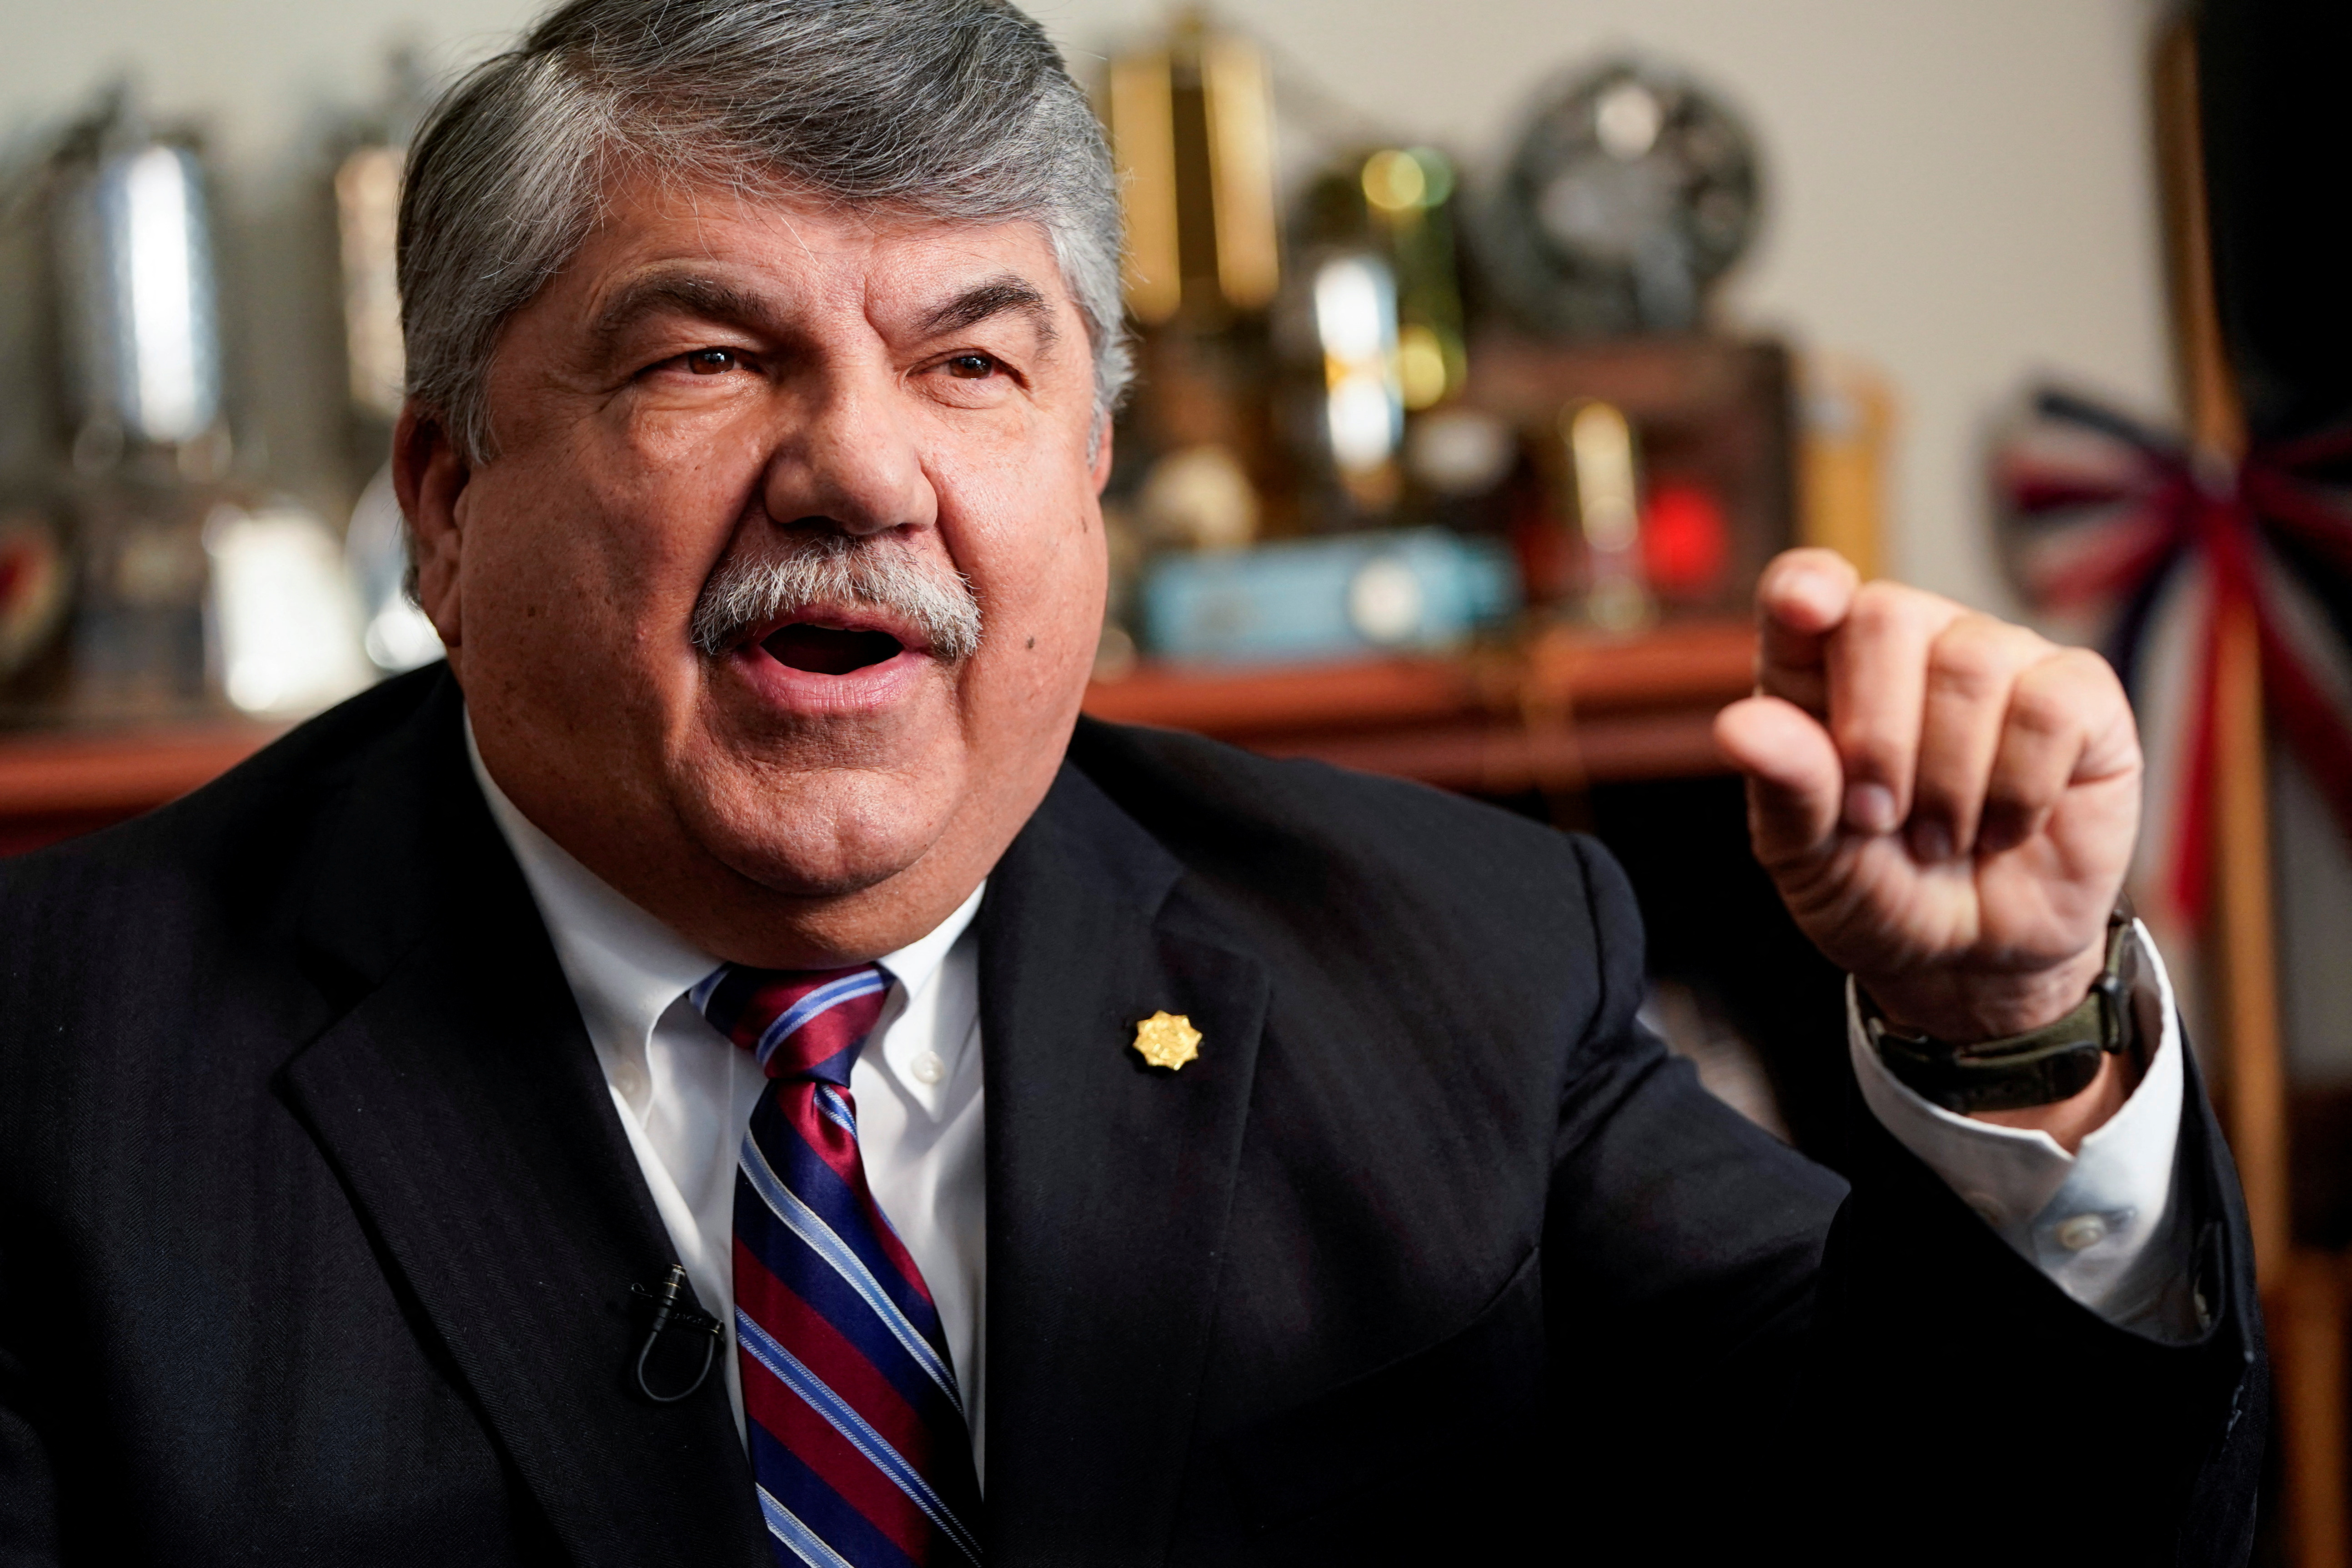 President of the AFL-CIO Richard Trumka speaks about his role in securing labor protections in the USMCA trade agreement in Washington